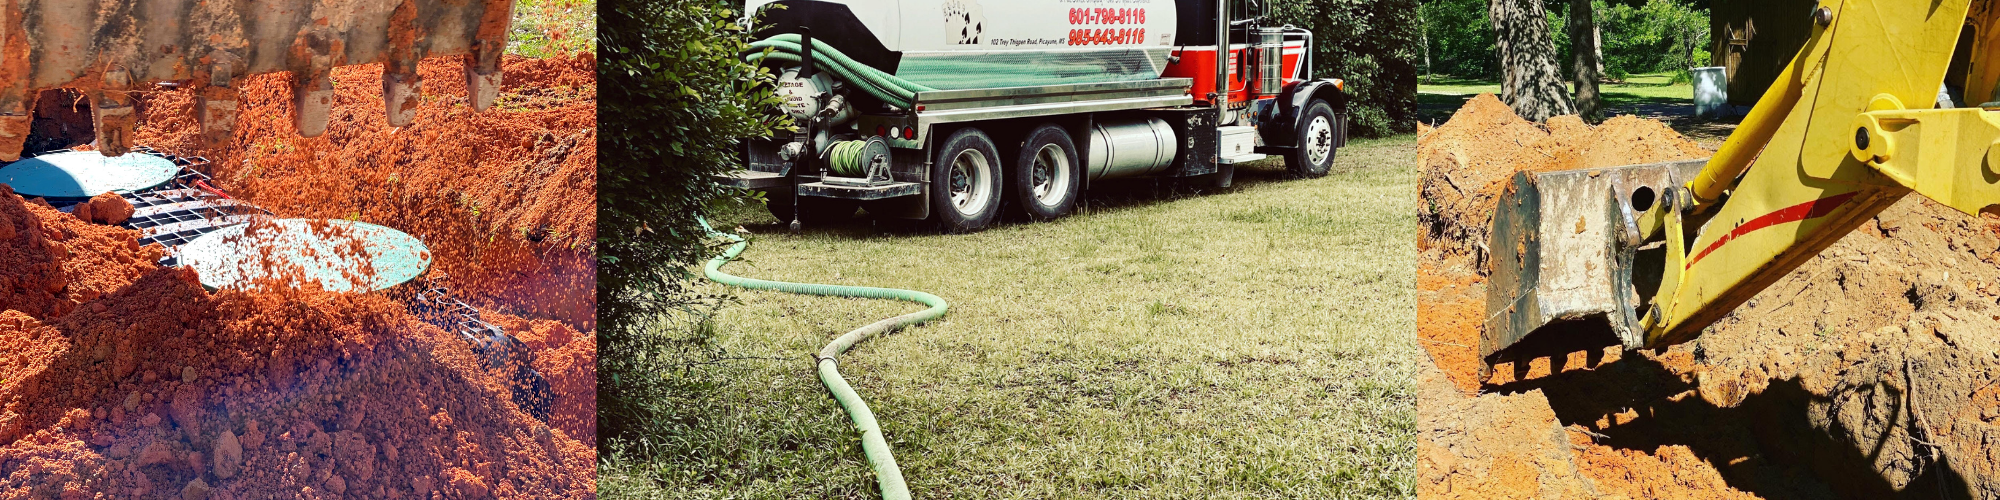 Commercial septic service